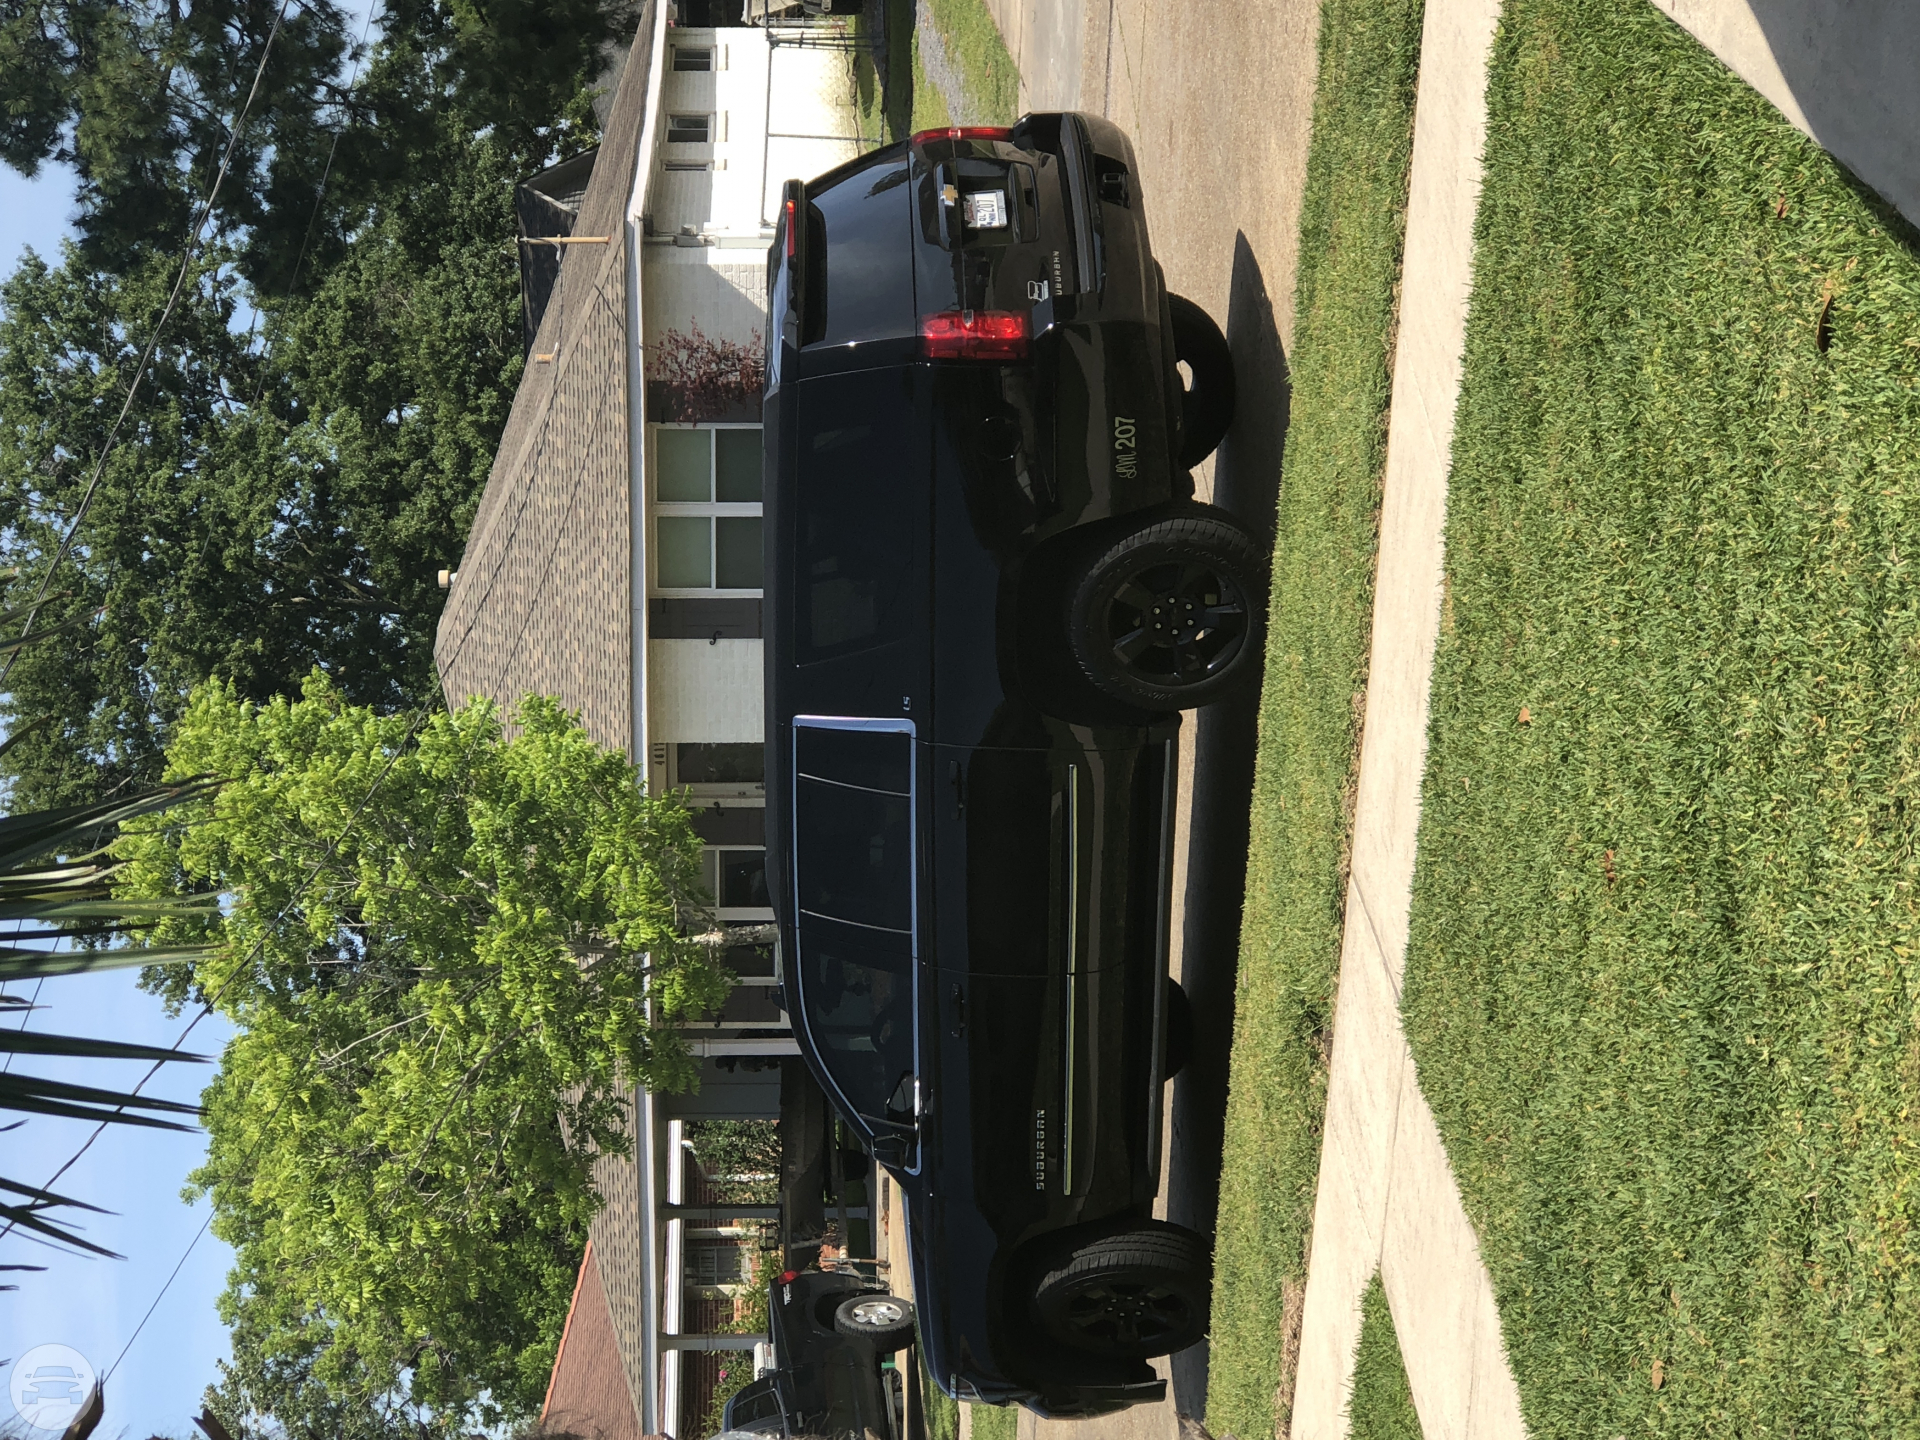 Chevy suburban
- /
New Orleans, LA

 / Hourly $0.00
